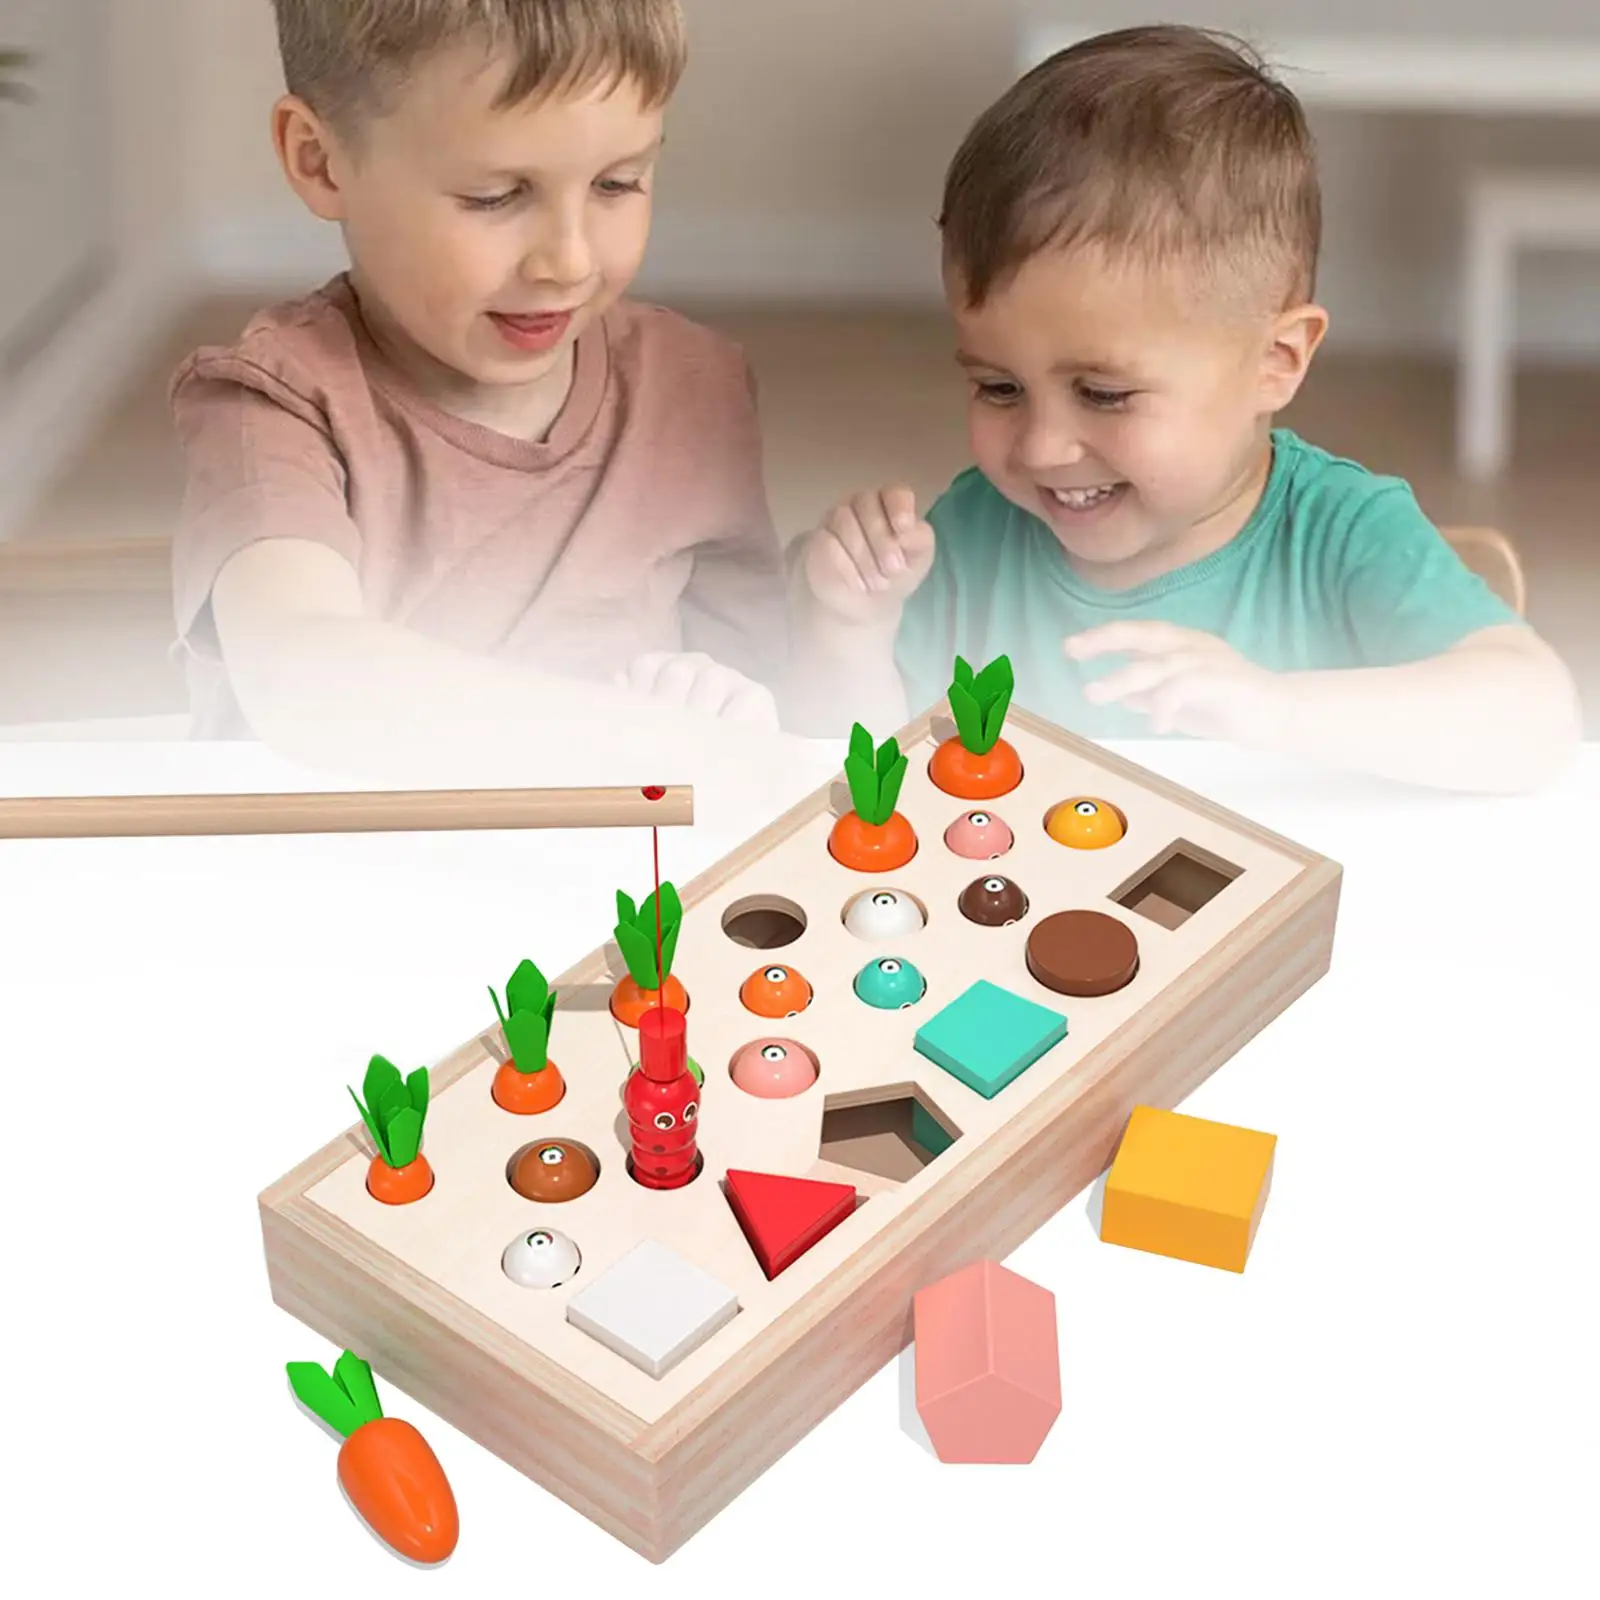 Kids Montessori Wooden Toys Catching Insects Pulling Carrot Toy for Children